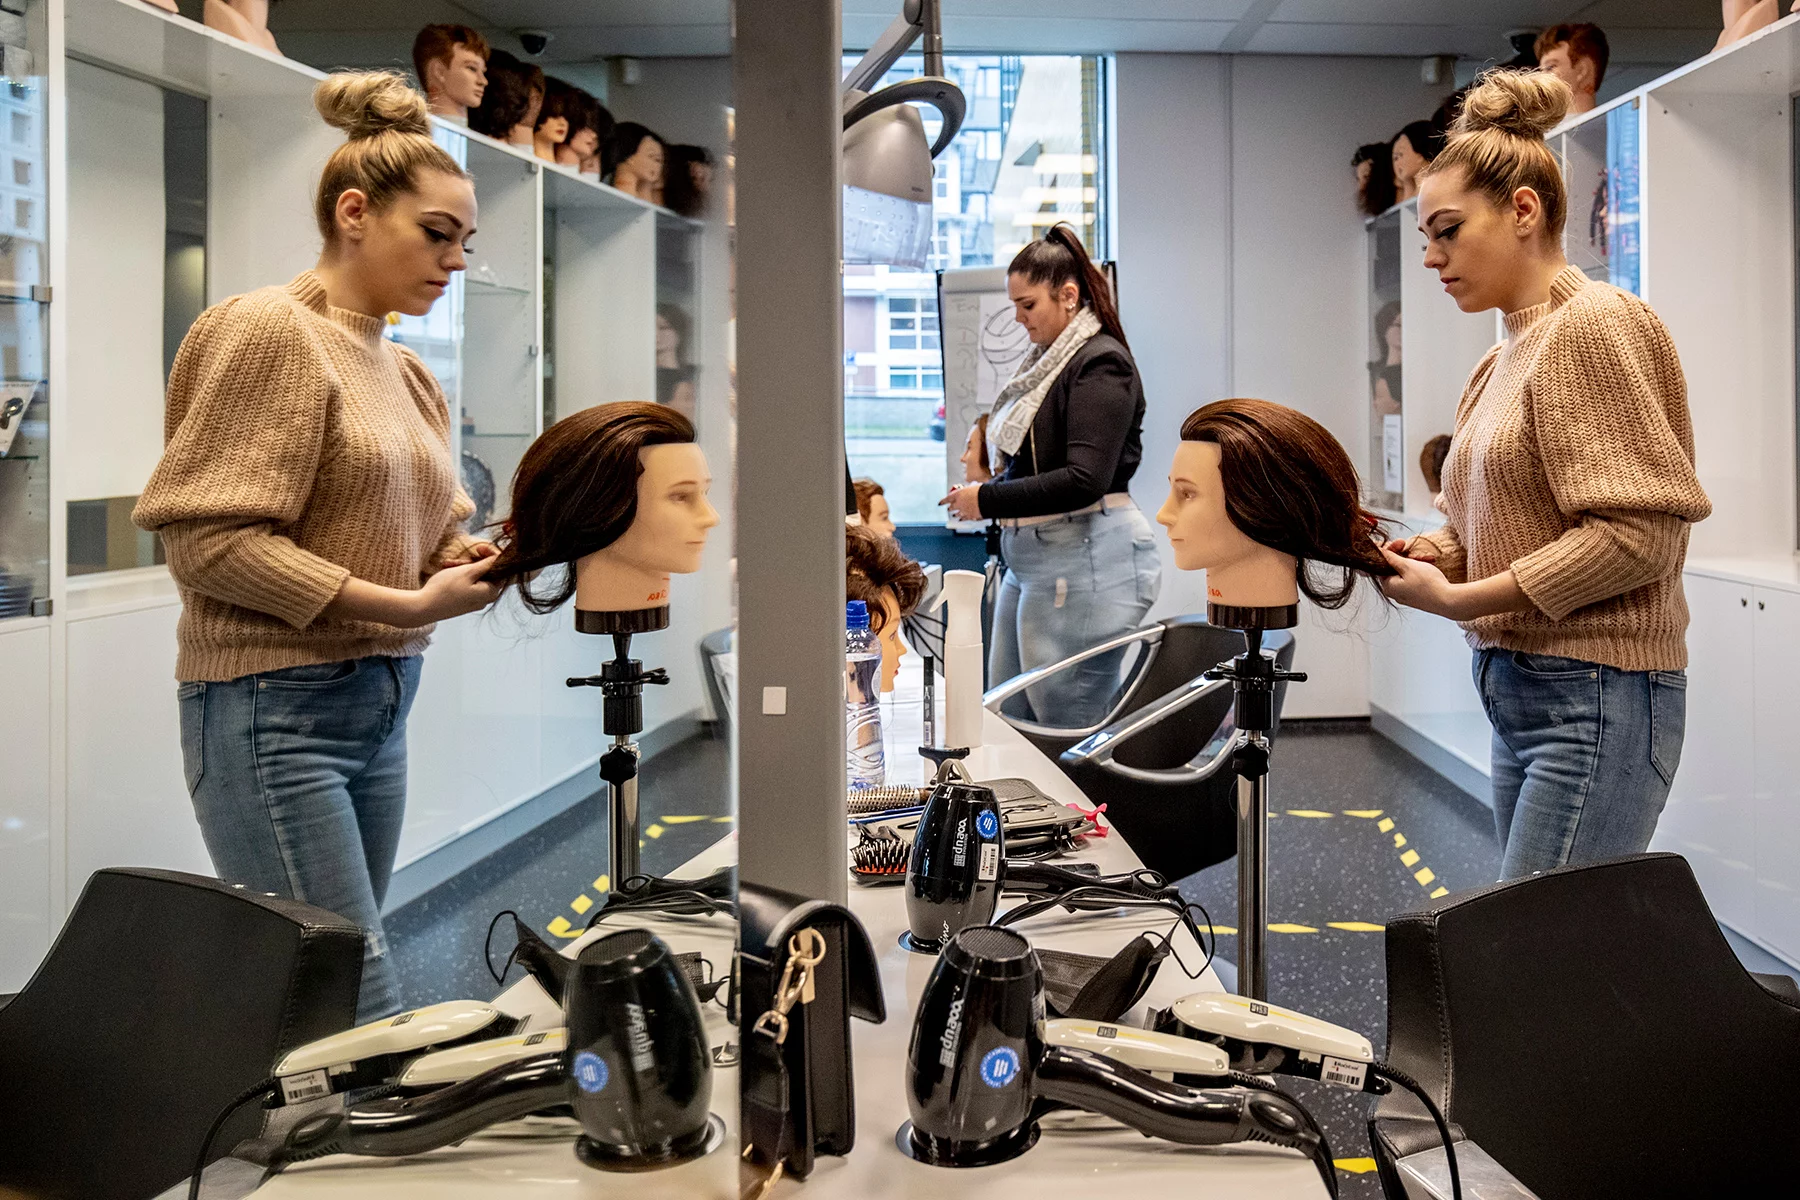 Students in hairdresser training working on a dummy head with hair